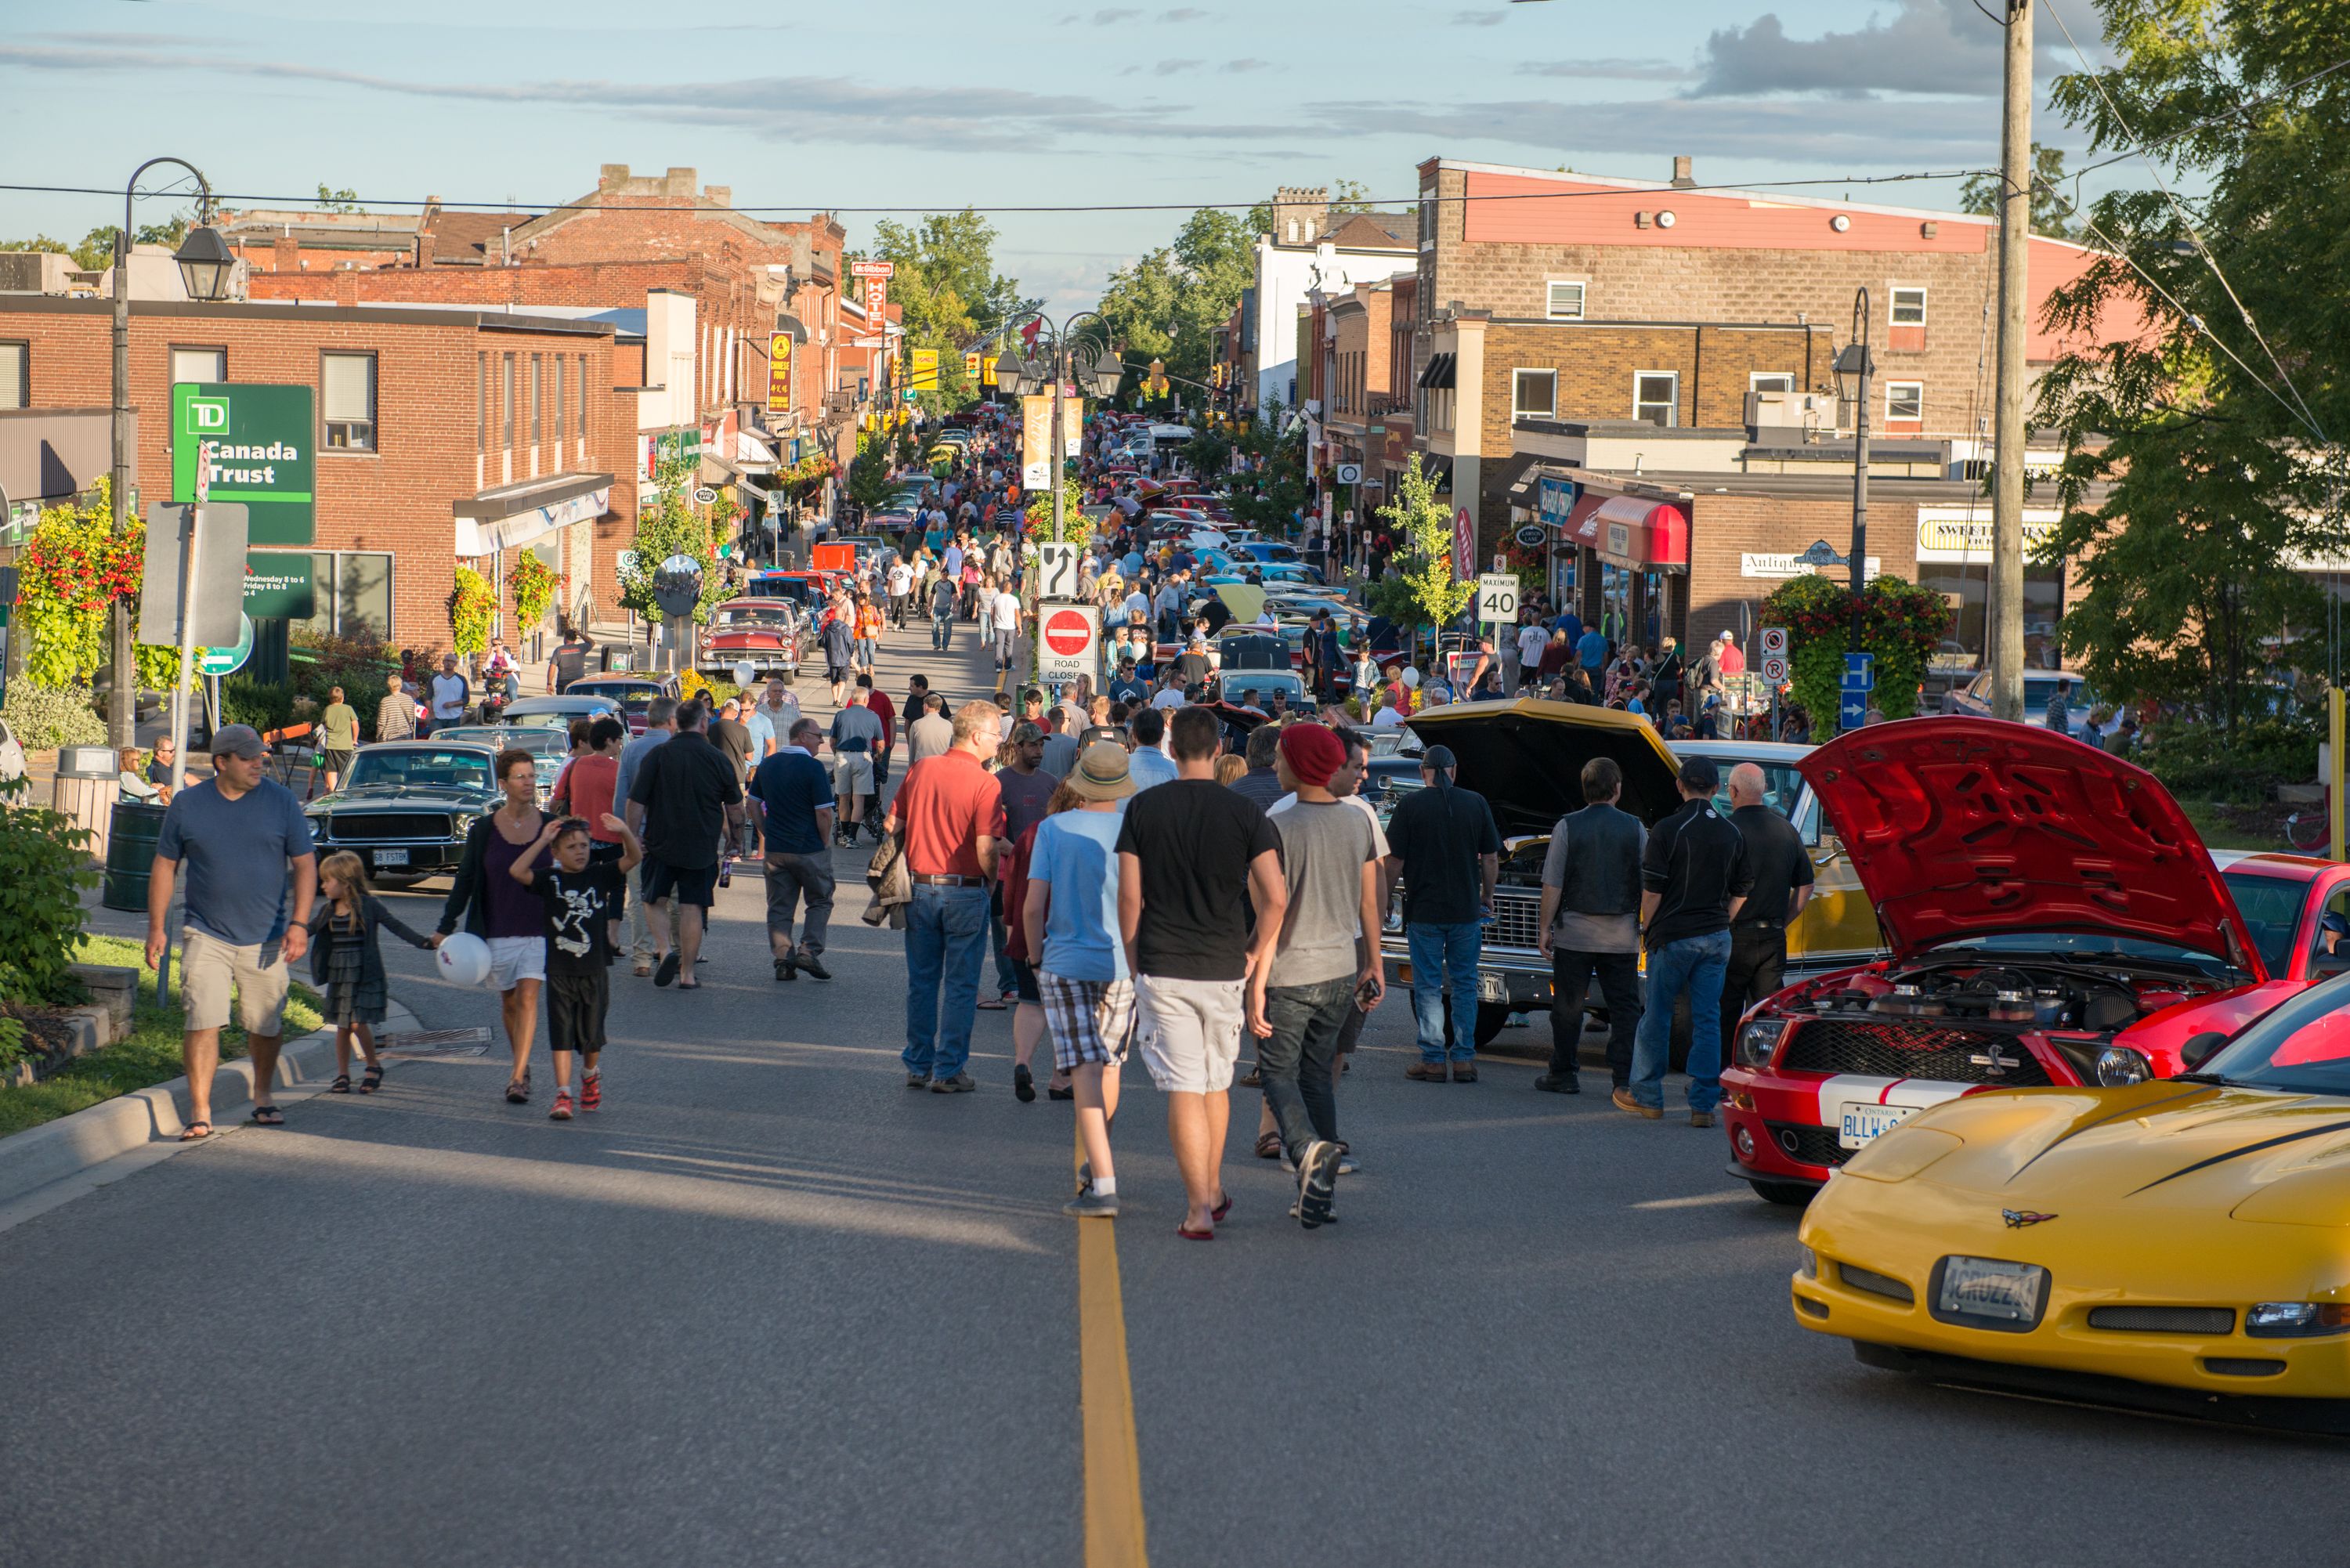 Cars at Classics against cancer car show with crowd of people on a busy street